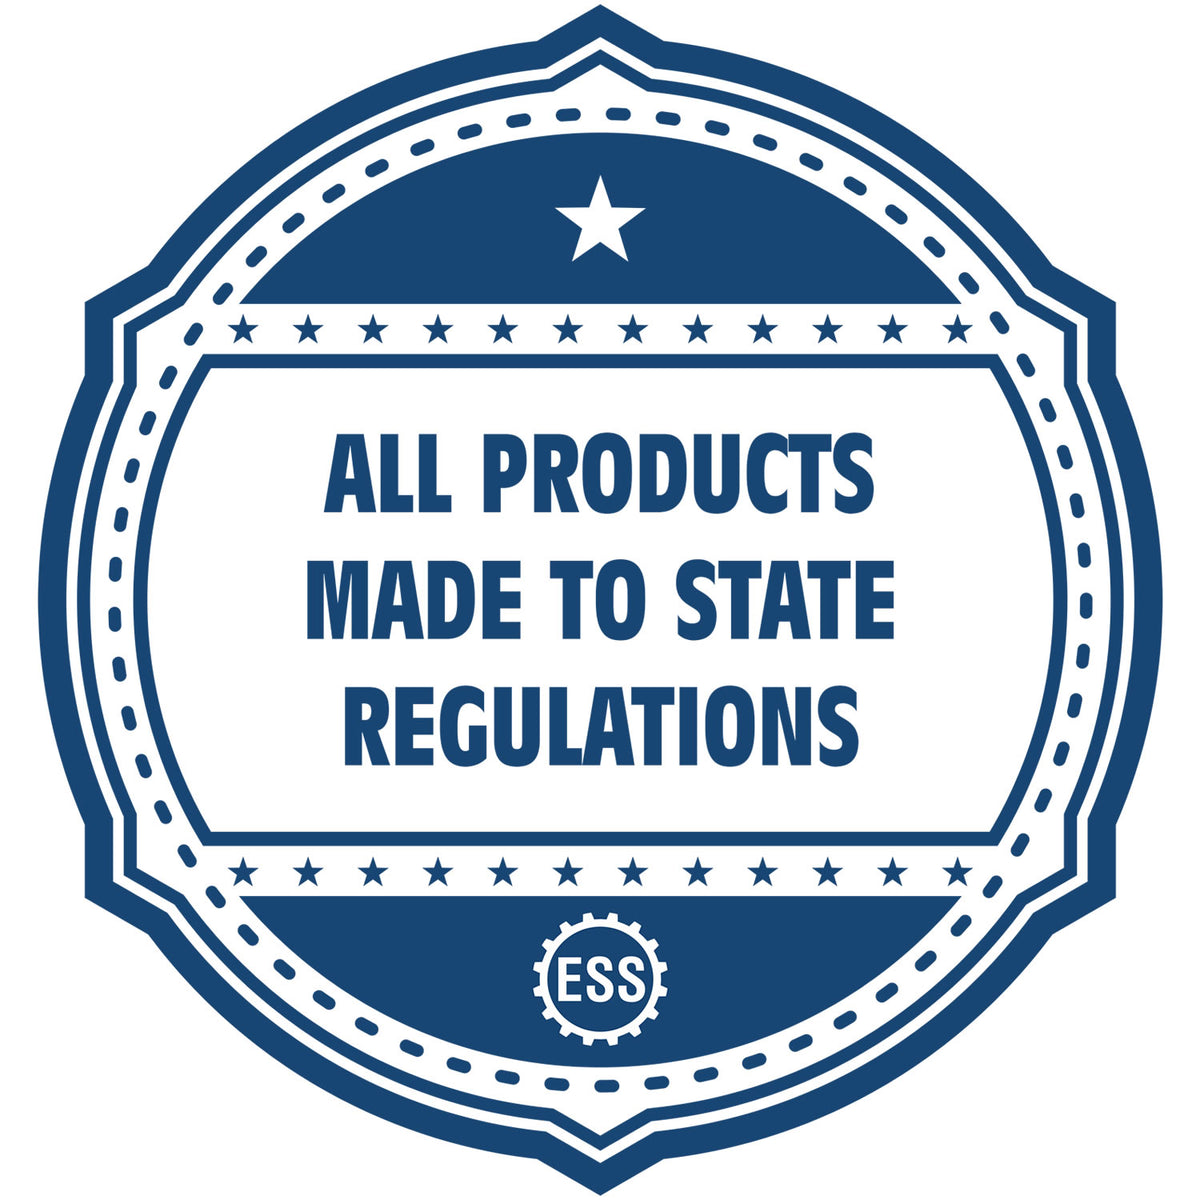 A blue icon or badge for the Hybrid Indiana Engineer Seal showing that this product is made in compliance with state regulations.